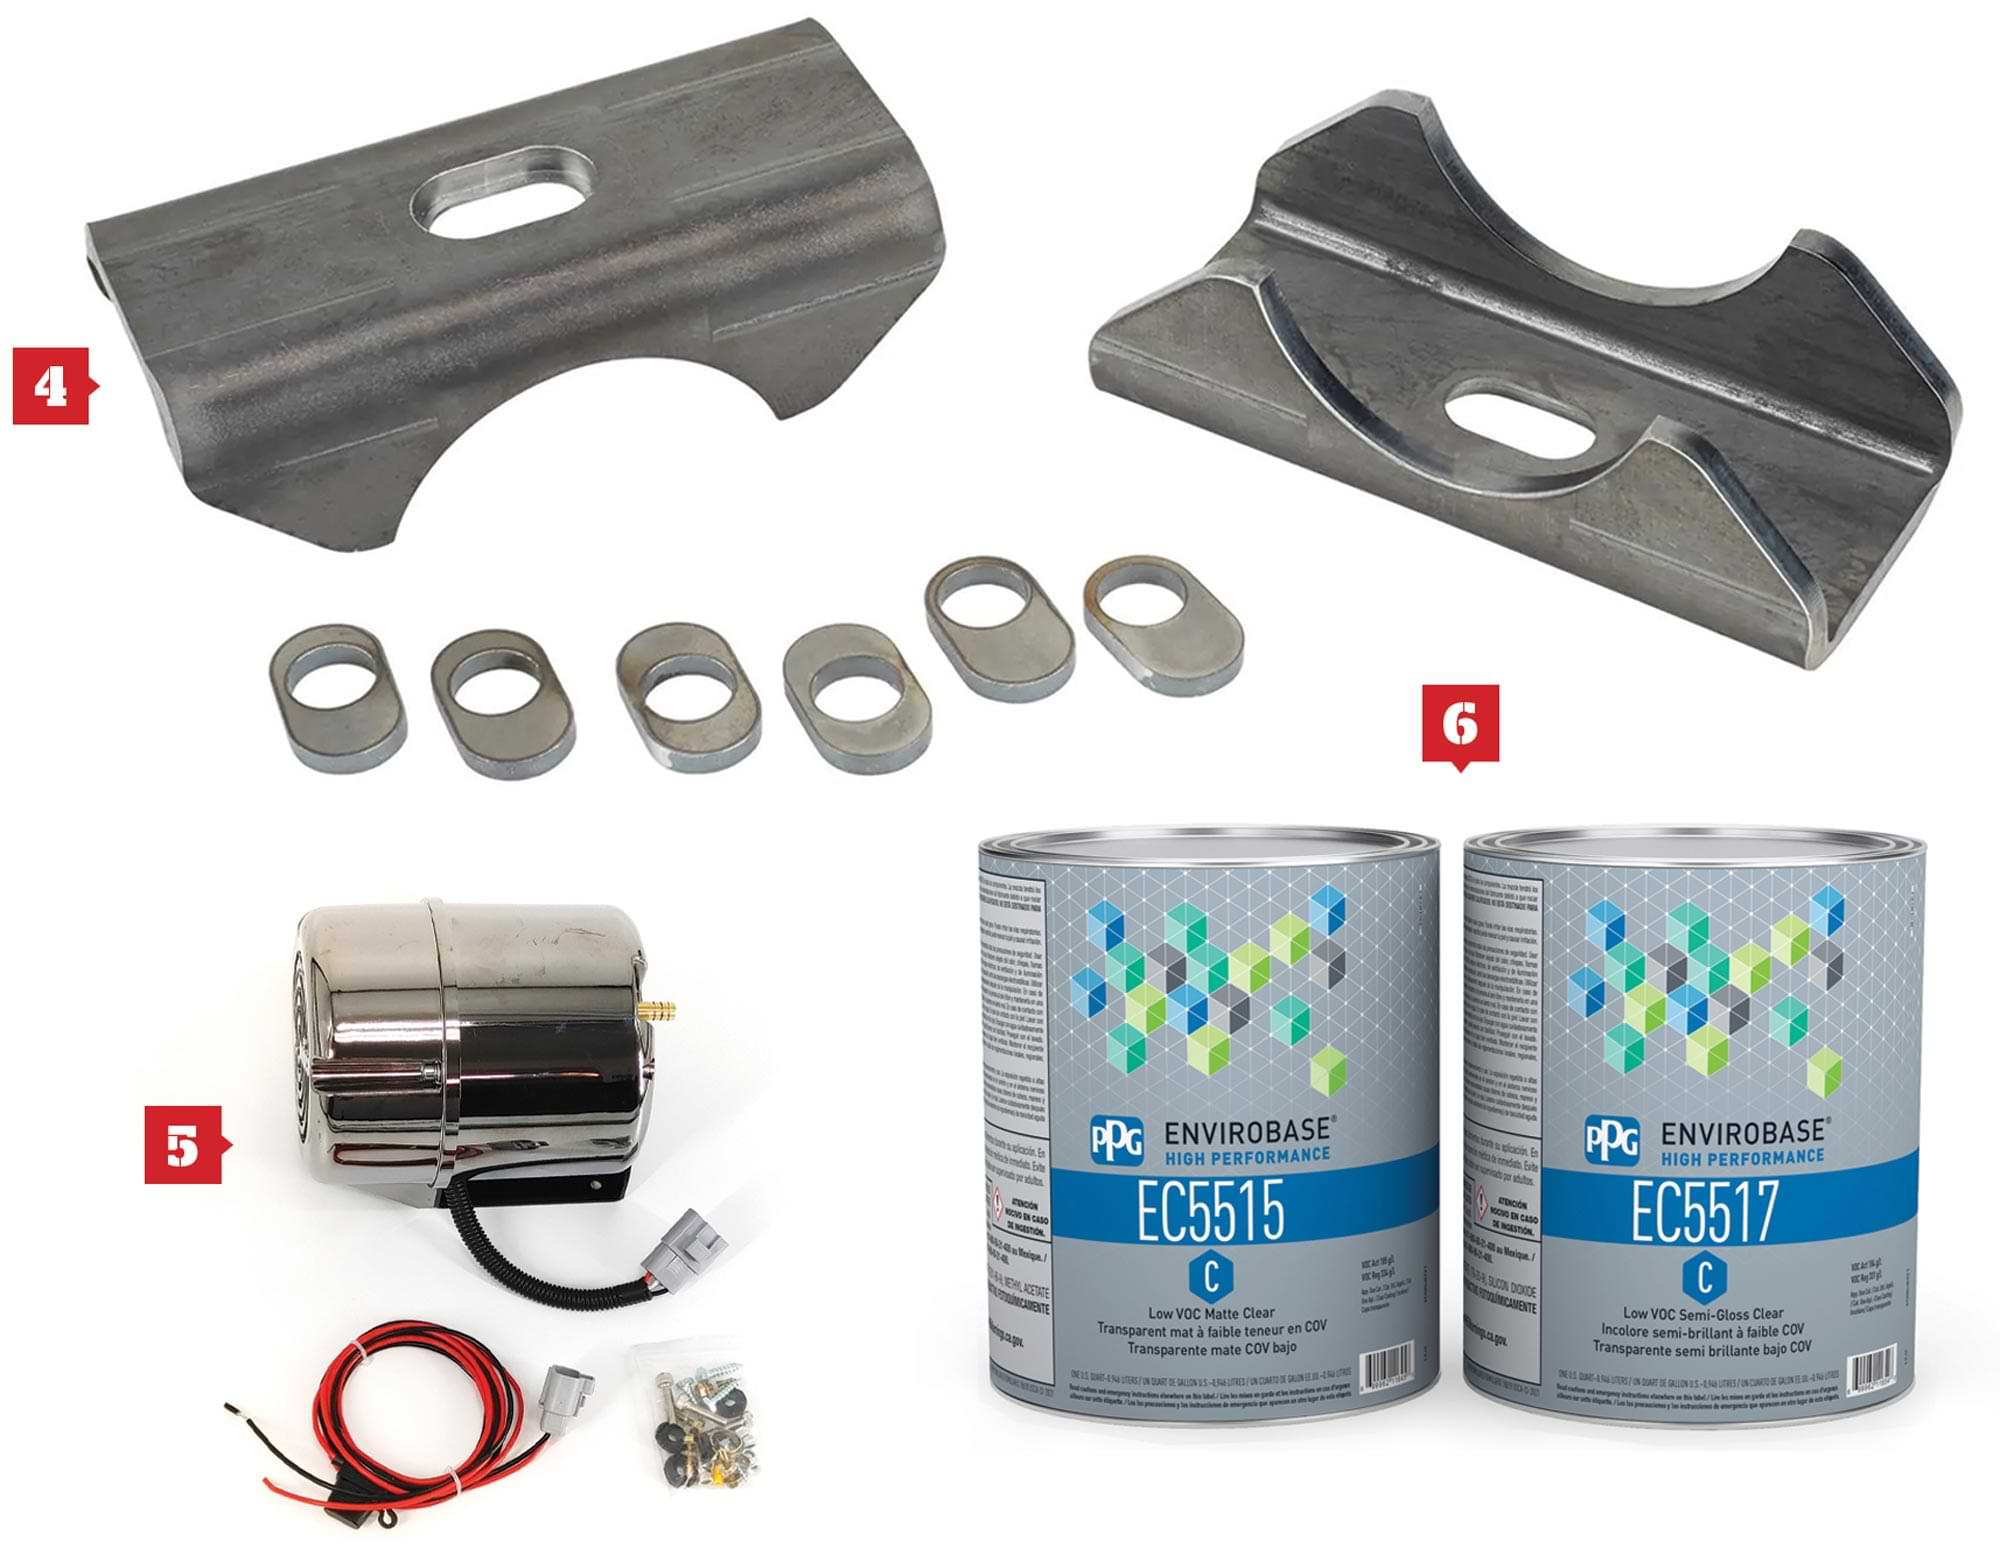 Speedway Motors leaf spring pads; Granatelli Motor Sports 12-Volt Electric Vacuum Pump Kit; PPG 2.1 Low VOC Matte and Semi-Gloss Clearcoats